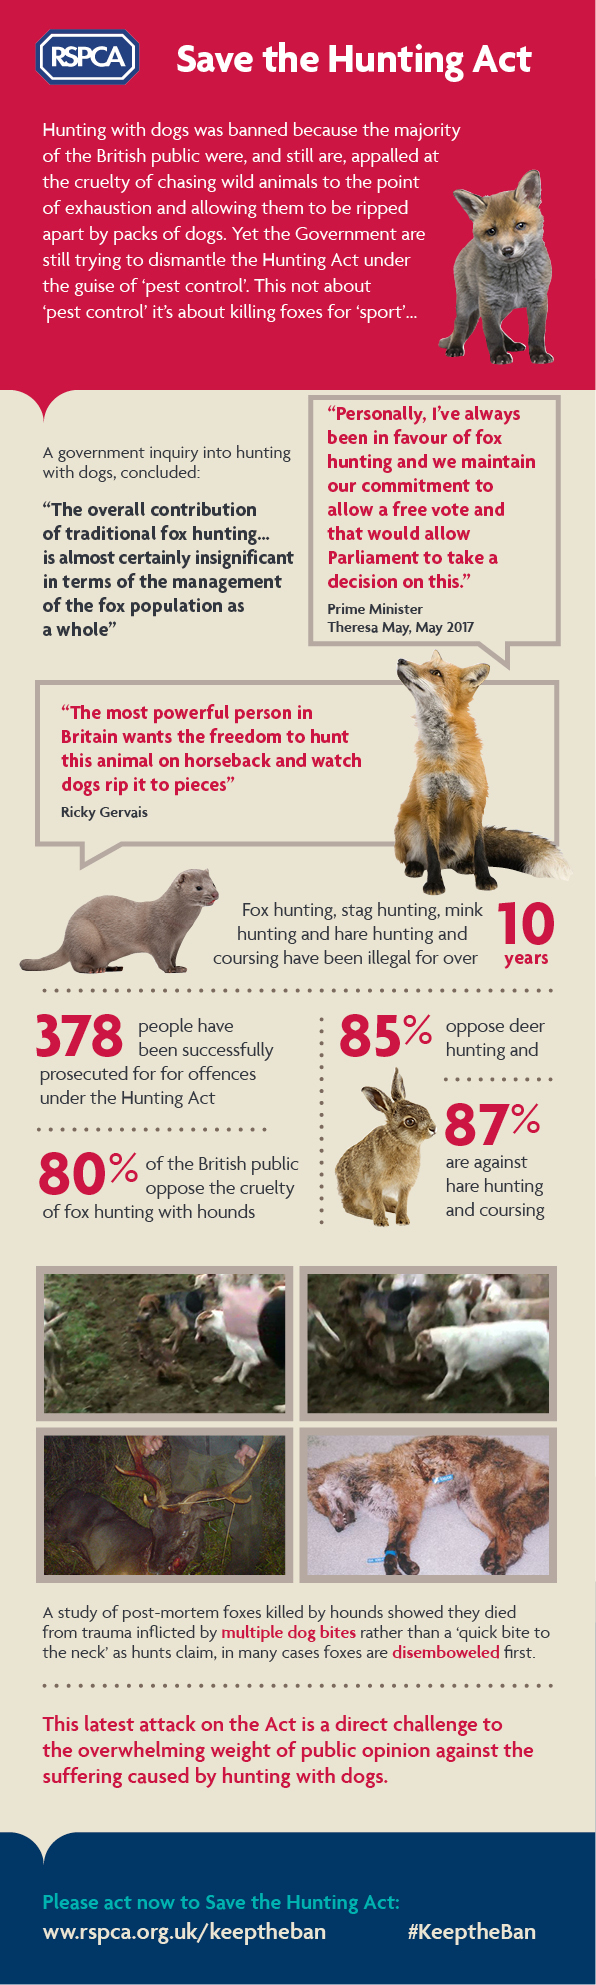 Save the hunting act Infographic